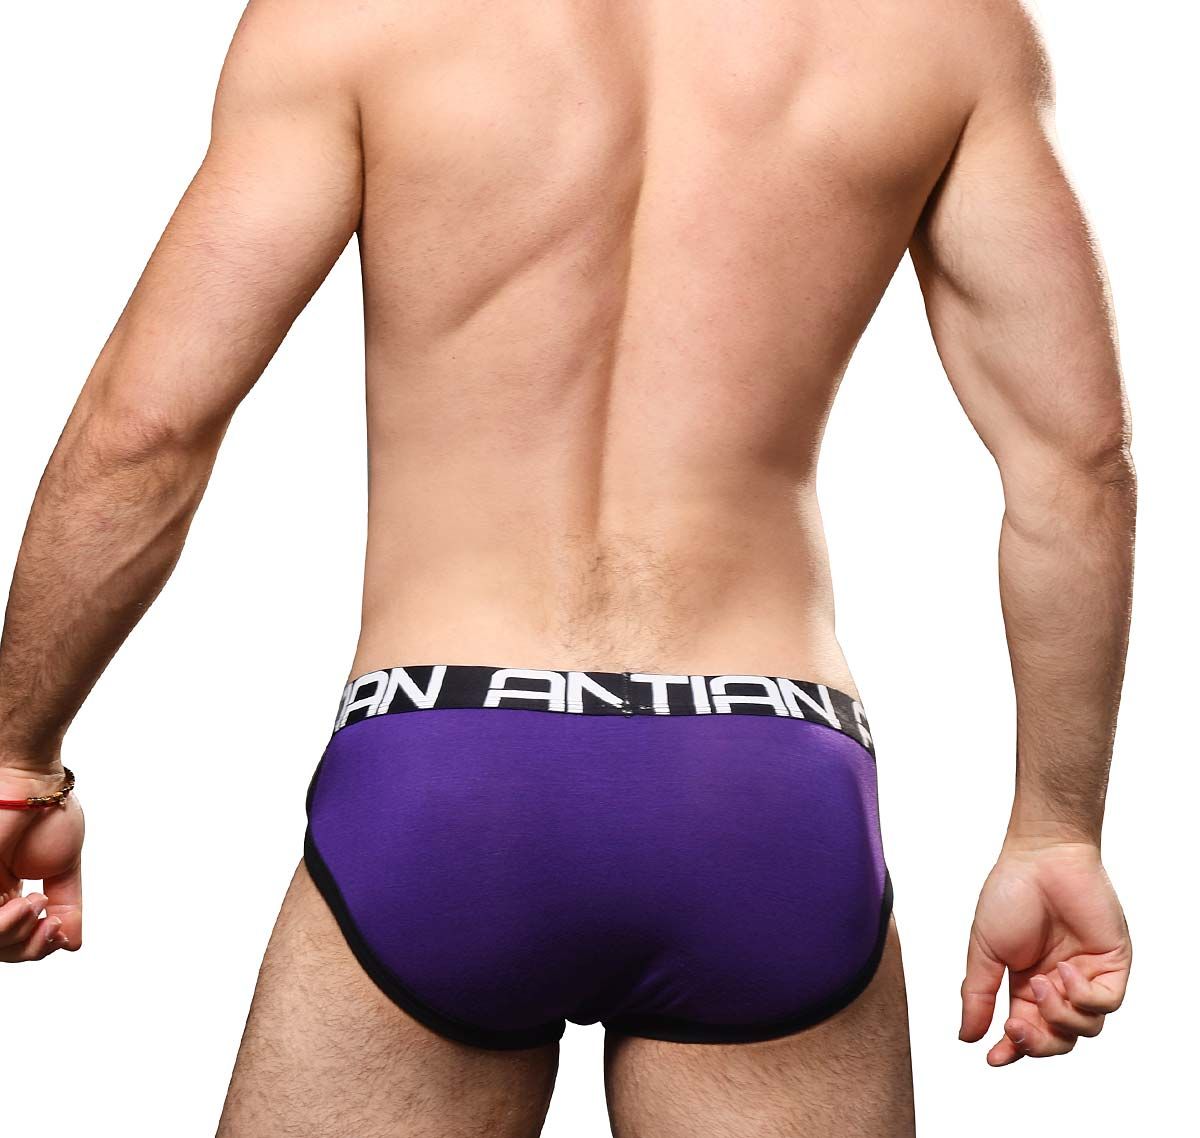 Andrew Christian Slip COOLFLEX MODAL TAGLESS BRIEF w/ Show-it 93024, violet